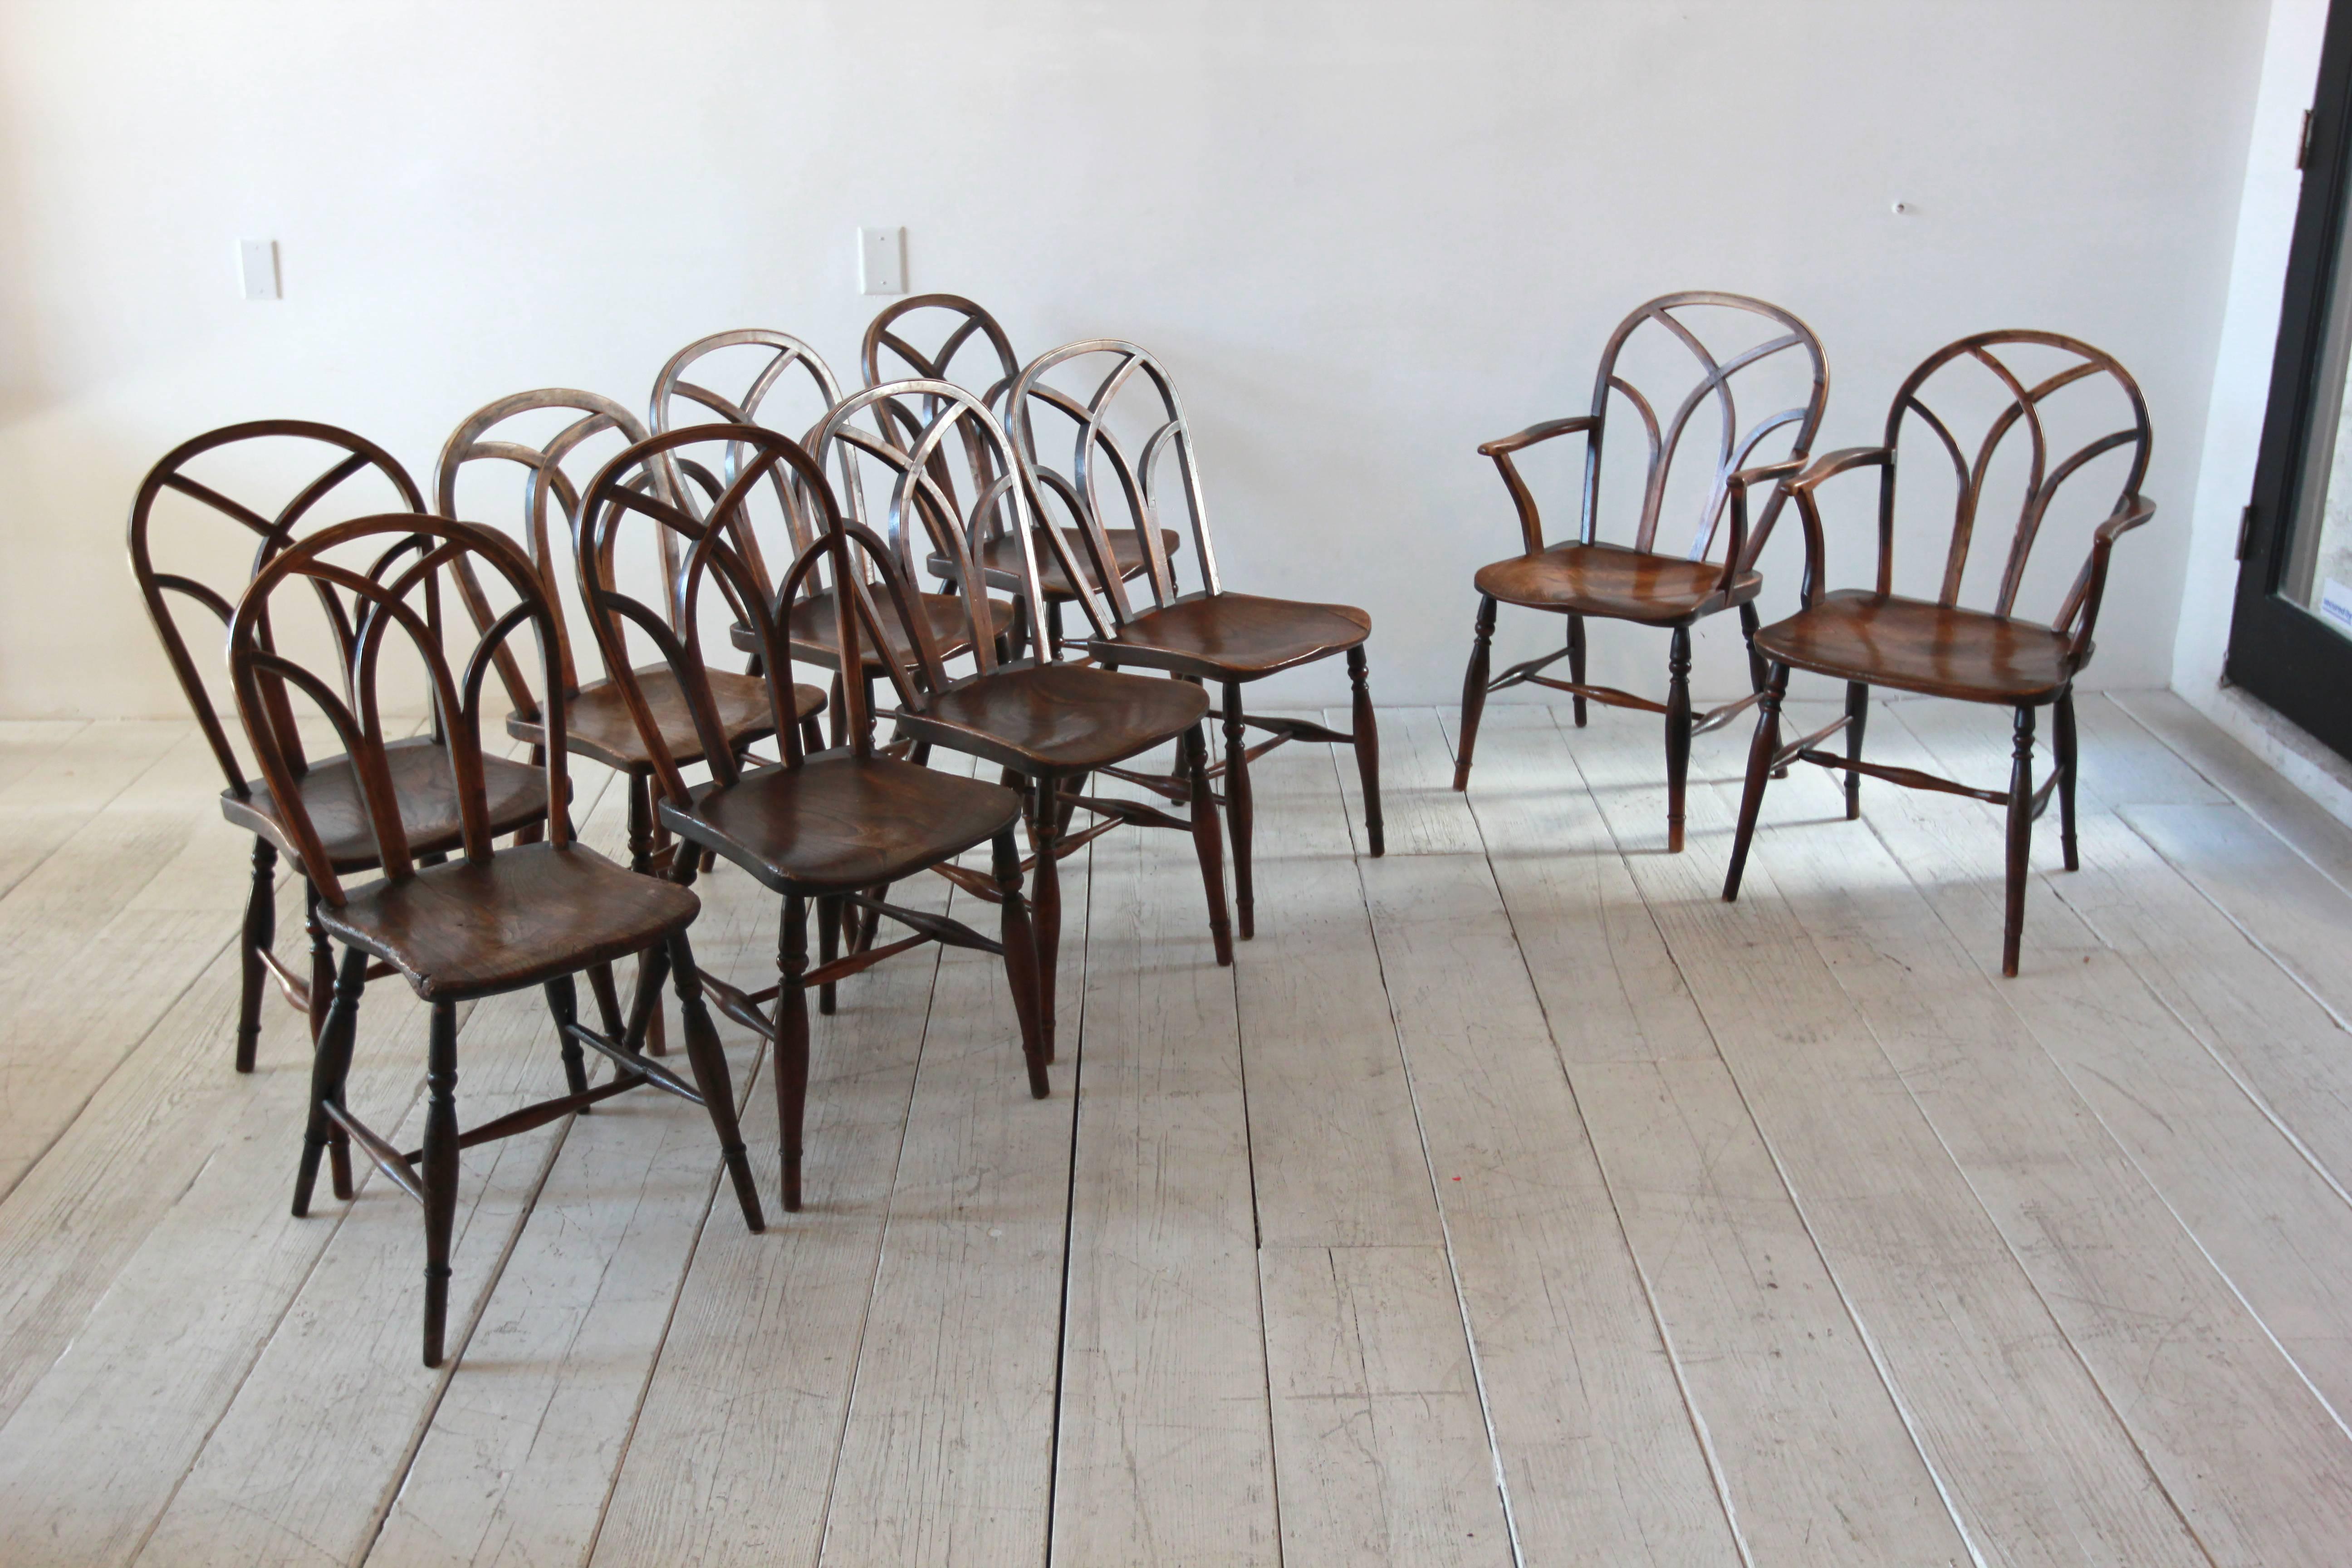 Set of ten farmhouse style dining chairs with cathedral style backs. Two armchairs and eight side chairs.